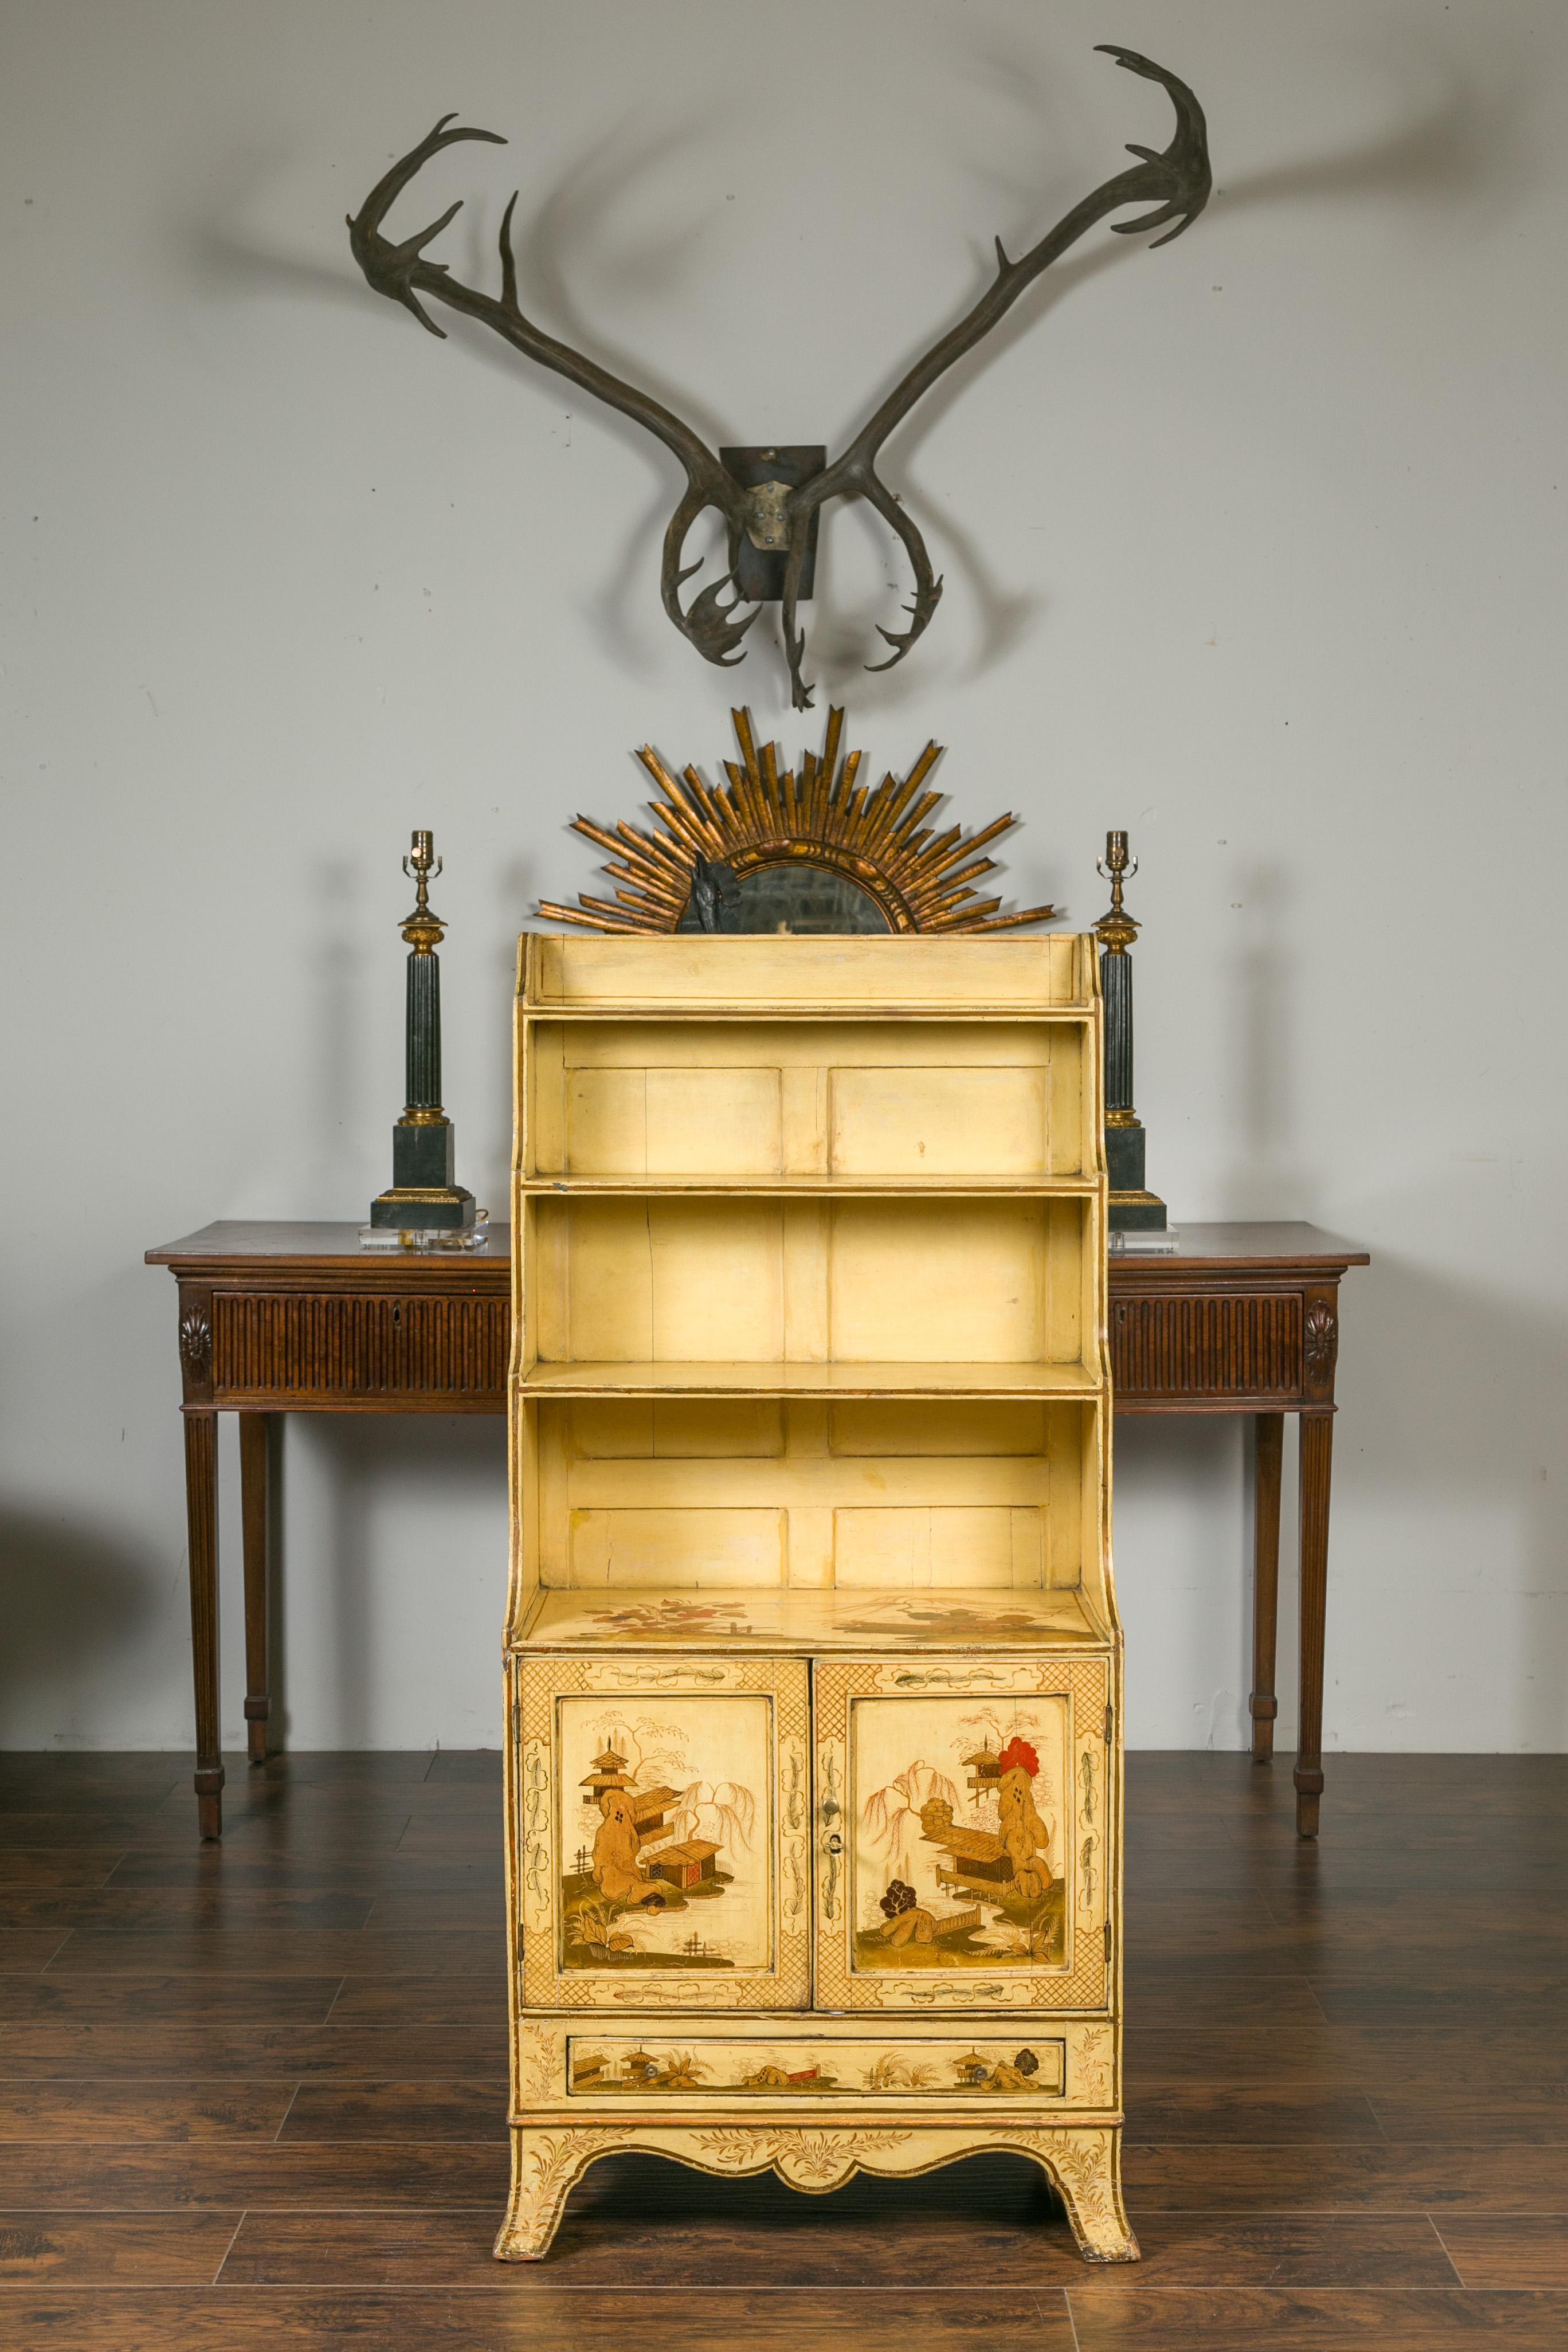 An English painted Chinoiserie waterfall bookcase from the late 19th century. Attracting our eyes with its soft yellow painted color adorned with Chinoiserie landscape motifs, this waterfall bookcase features open shelves of increasing sizes sitting